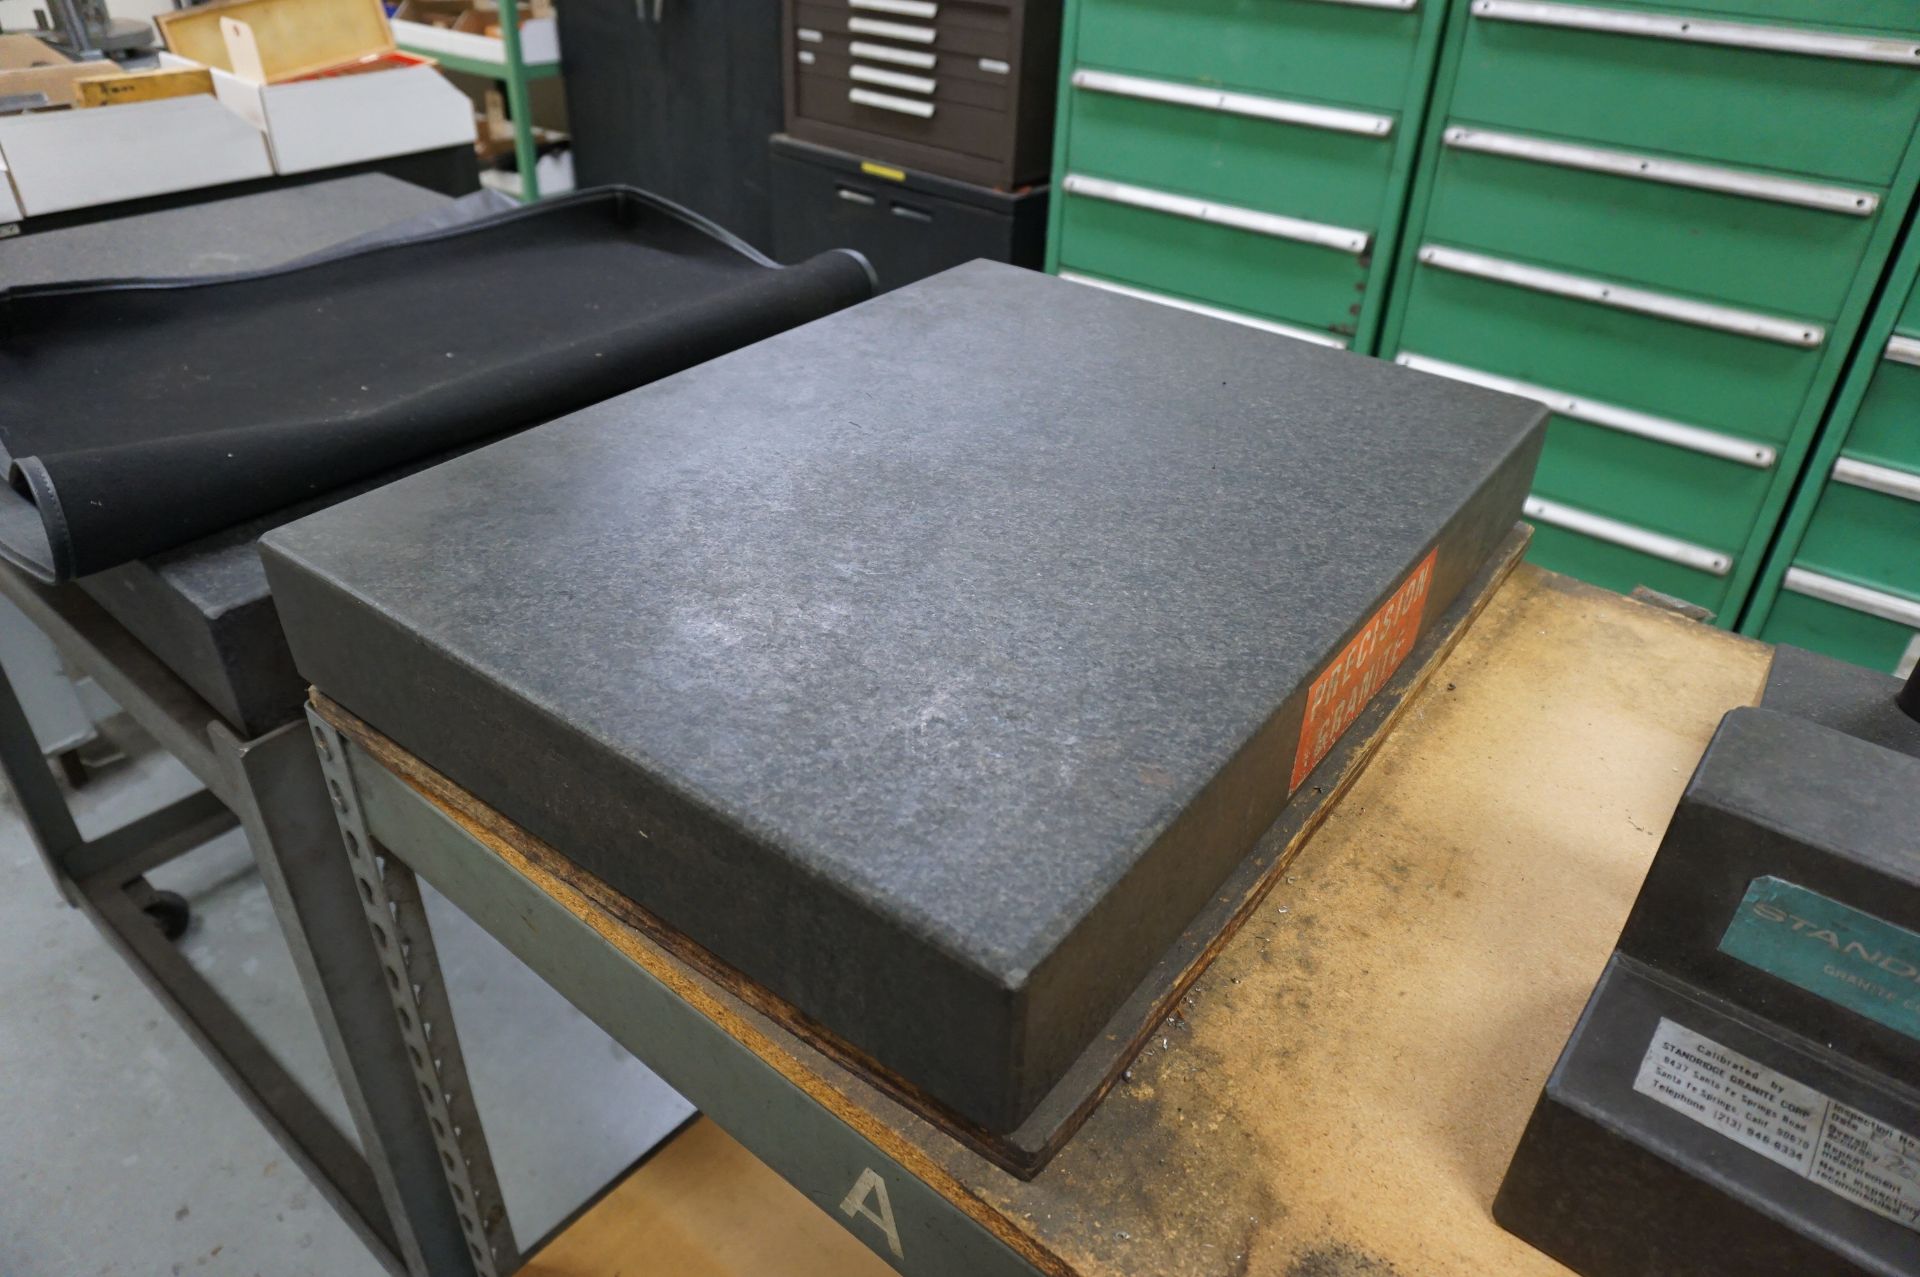 LOT TO INCLUDE: GRANITE SURFACE PLATE , SURFACE DIMENSIONS 24" X 18", STEP GRANITE BLOCK, GRANIT - Image 2 of 3